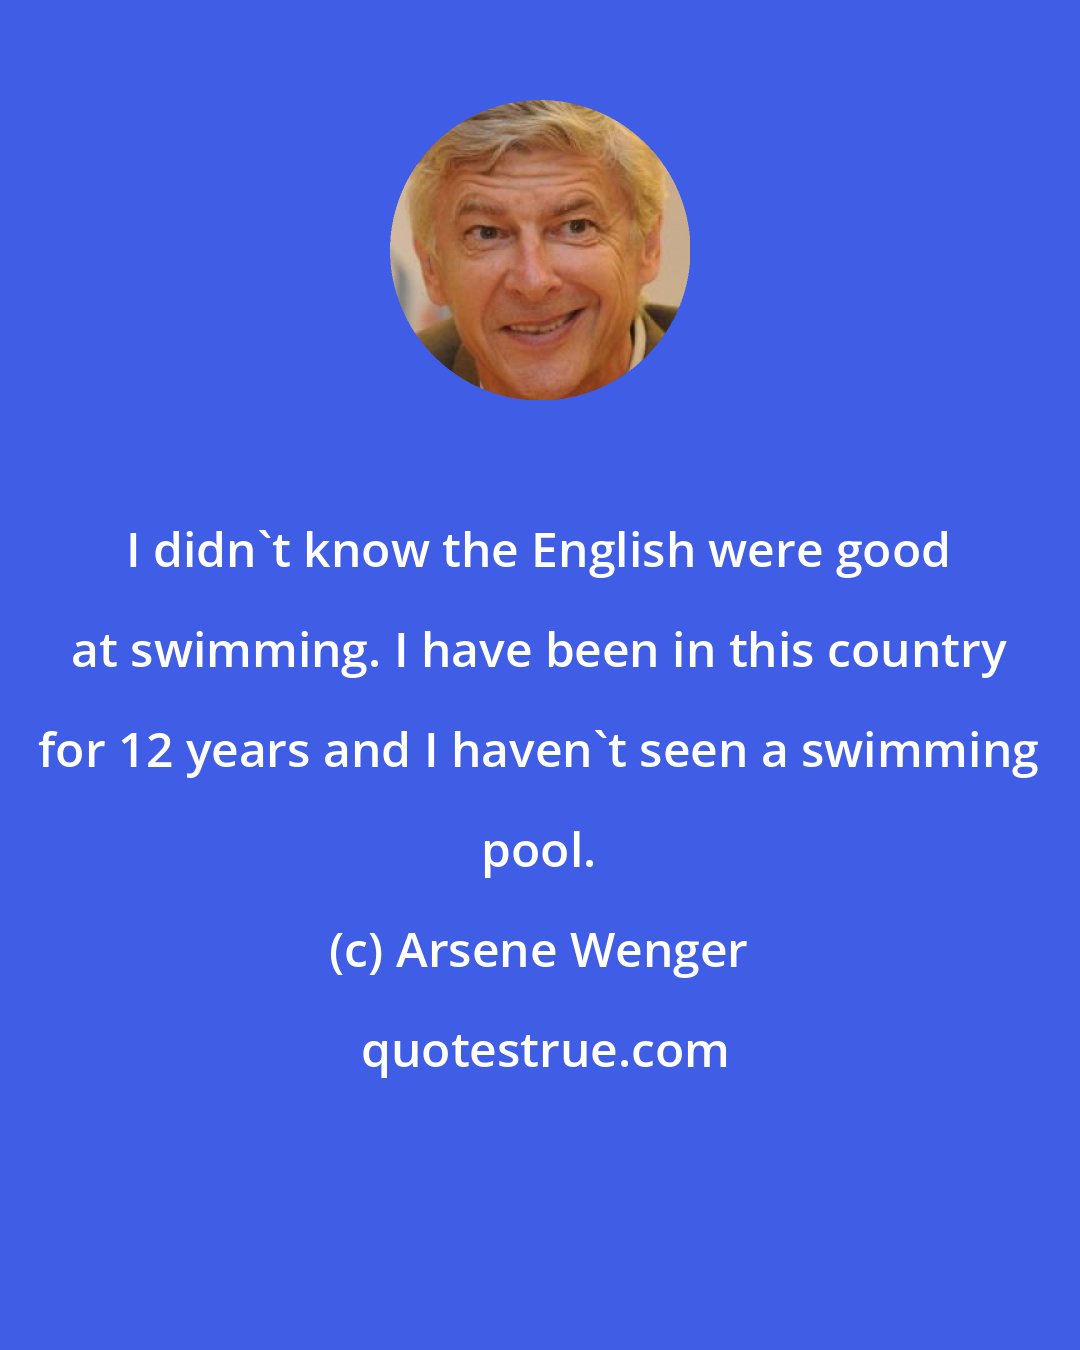 Arsene Wenger: I didn't know the English were good at swimming. I have been in this country for 12 years and I haven't seen a swimming pool.